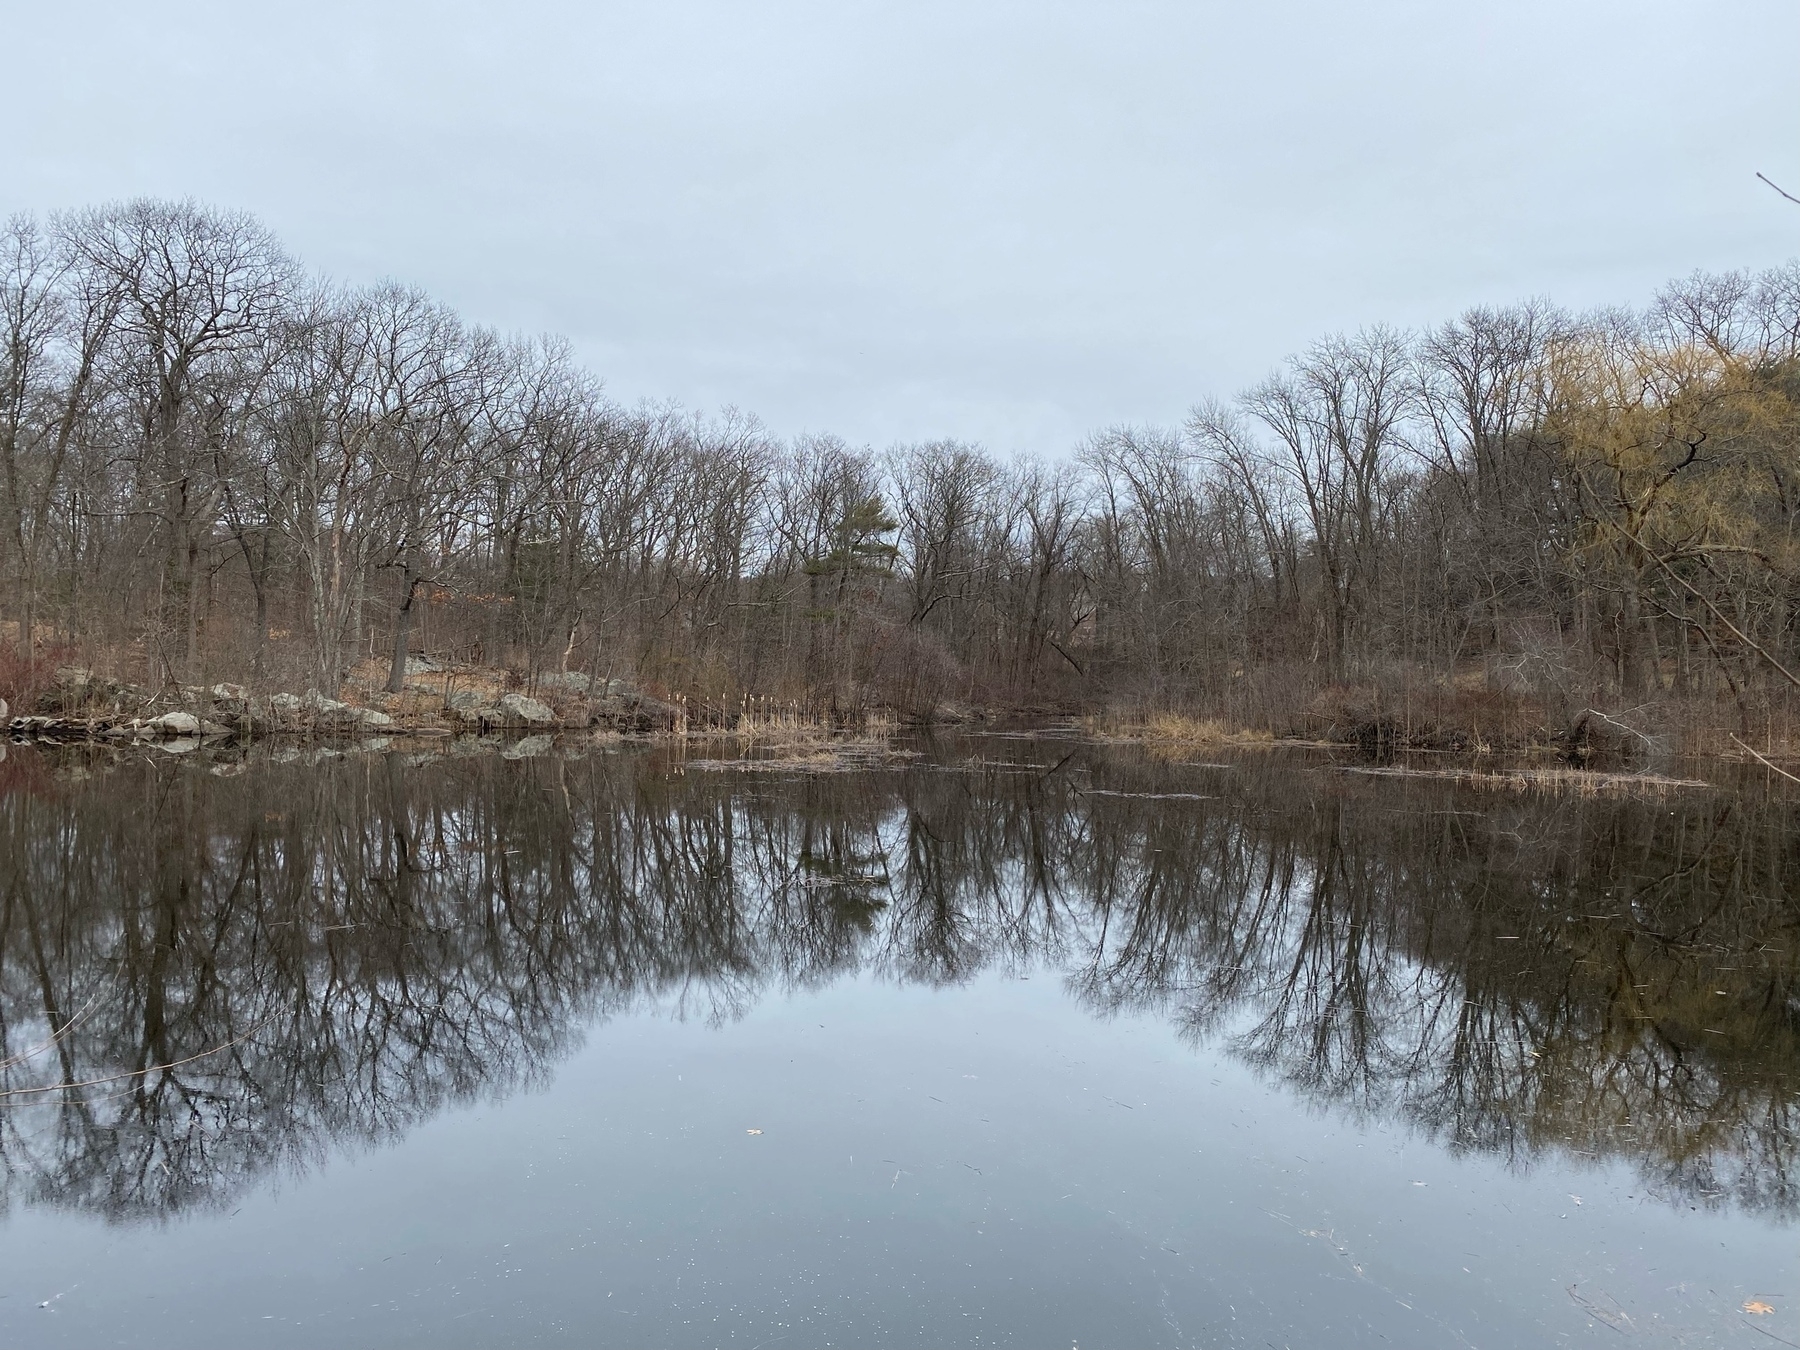 View of a still pond with two hills on the far shore covered in bare trees, reflected in the waters below.